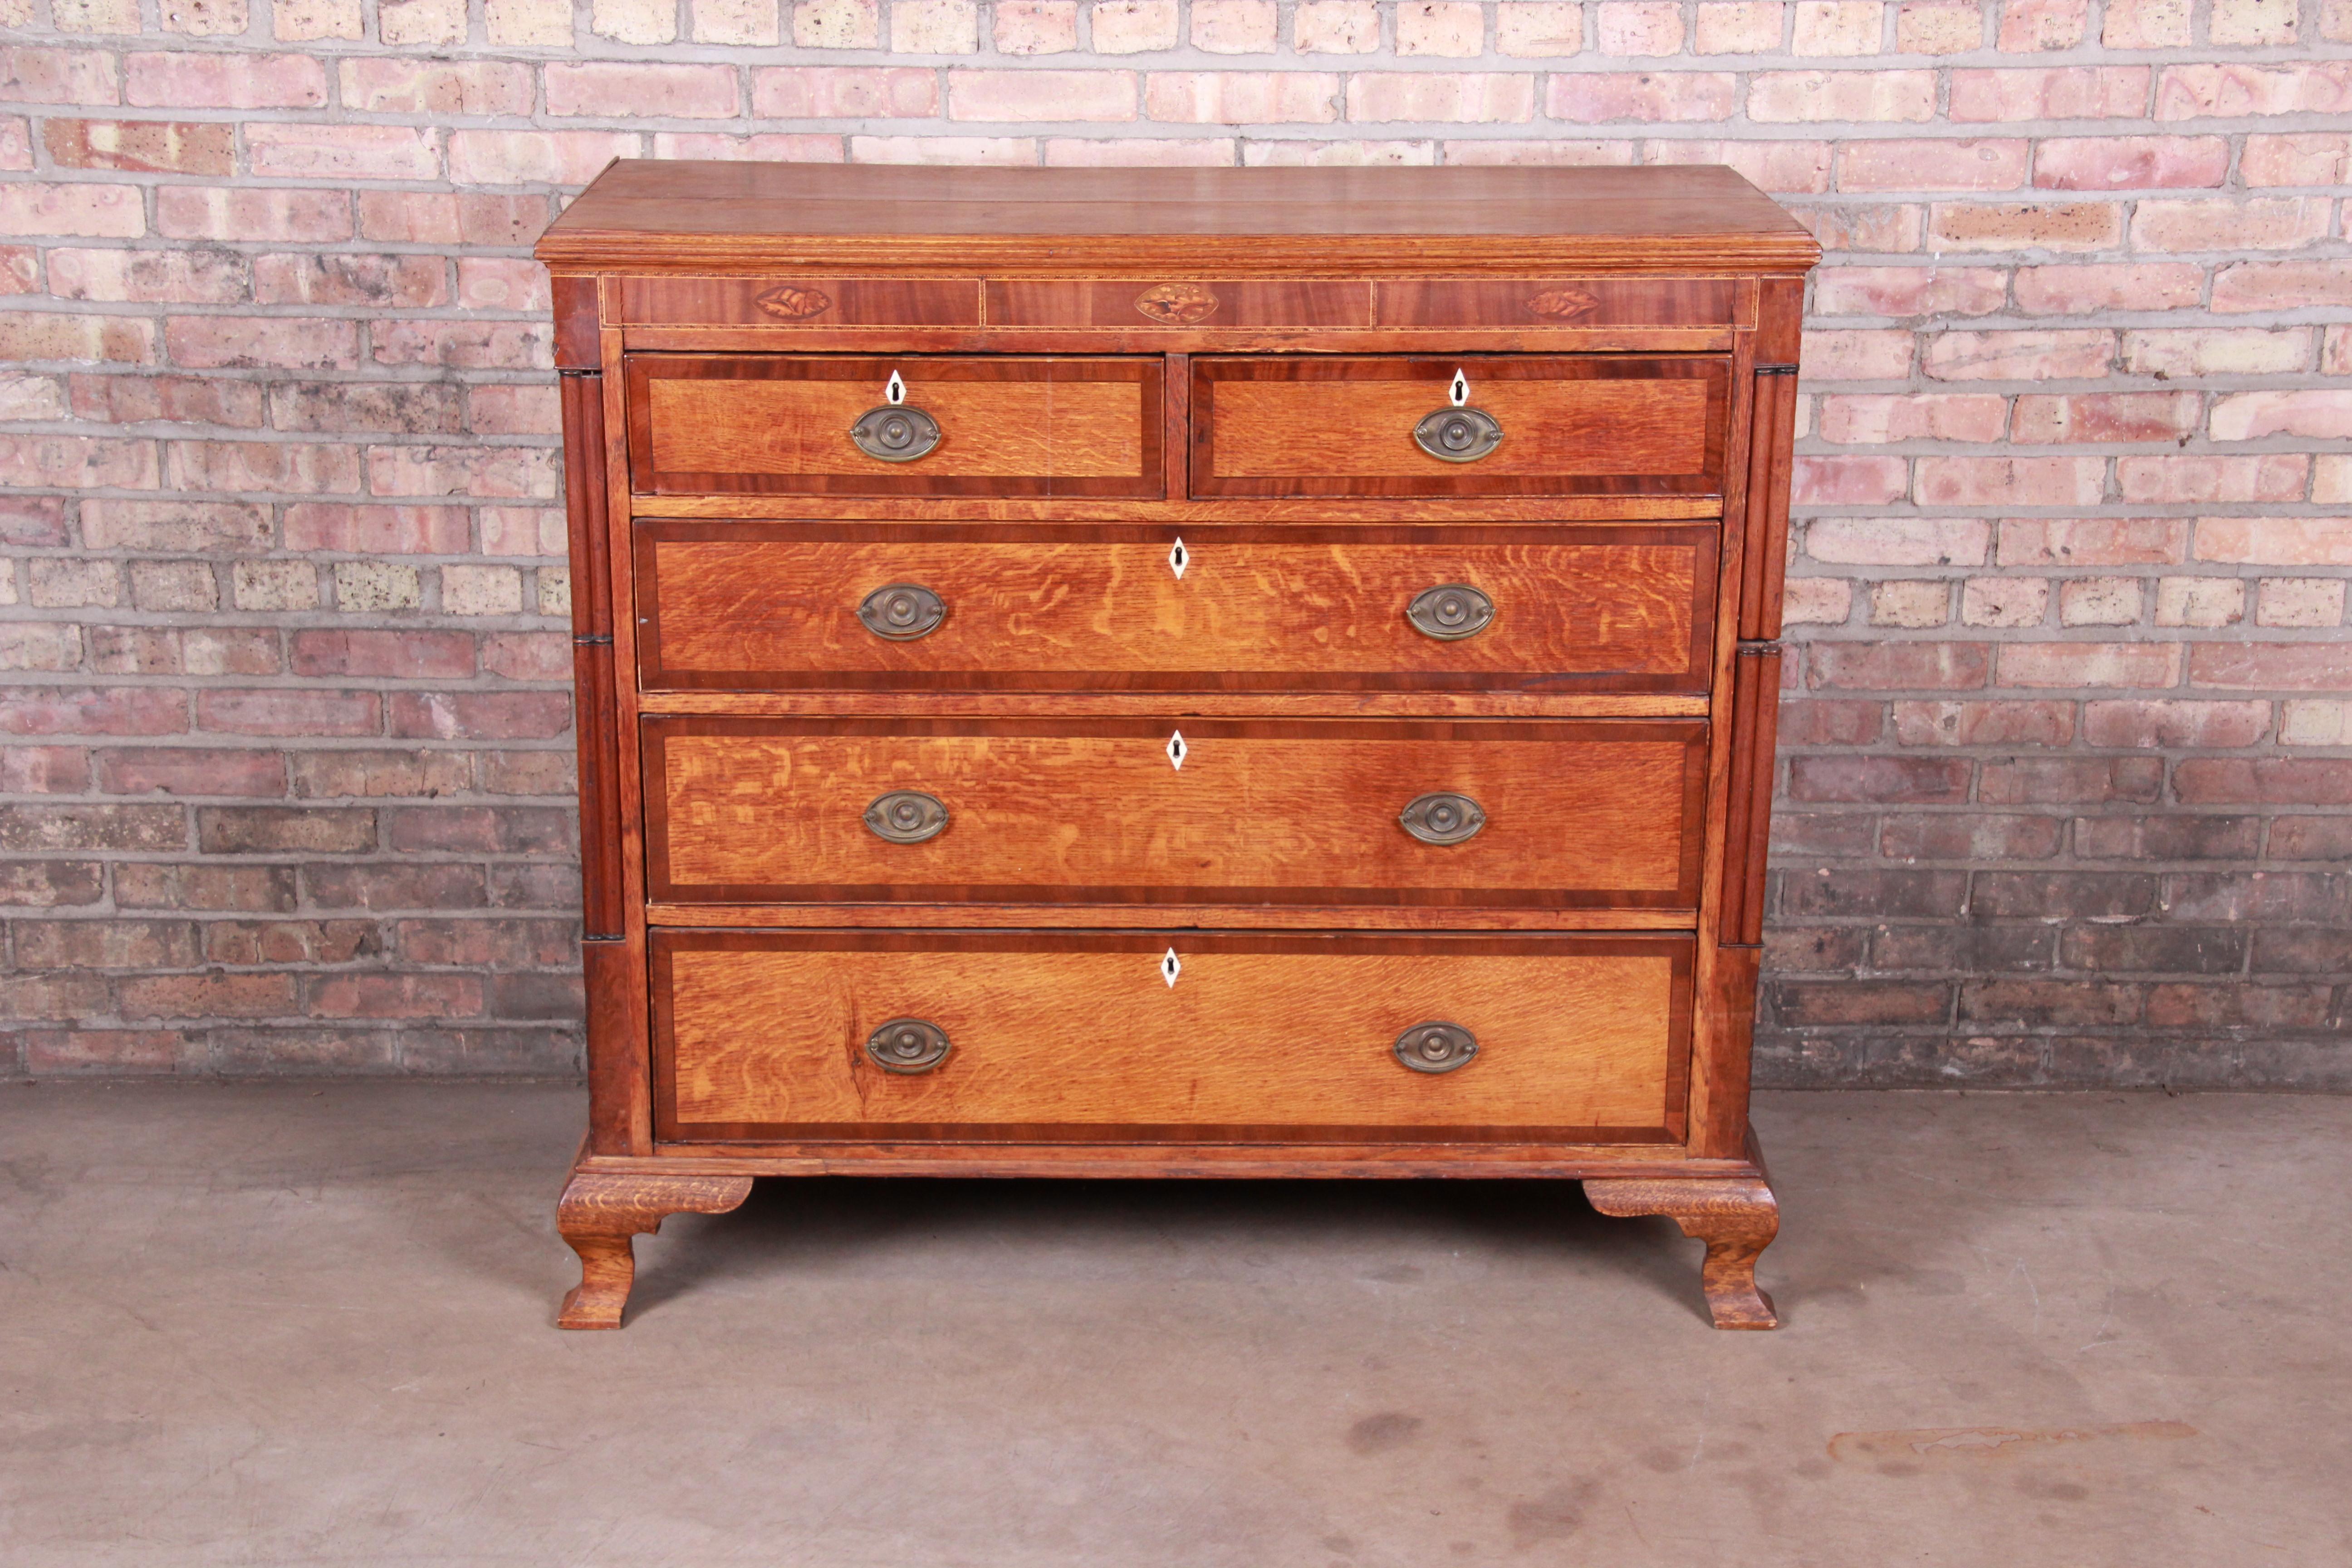 An exceptional antique Early American dresser or chest of drawers

USA, circa 1820s

Quarter sawn oak, inlaid mahogany with floral marquetry, inlaid bone escutcheons, and brass hardware.

Measures: 47.75